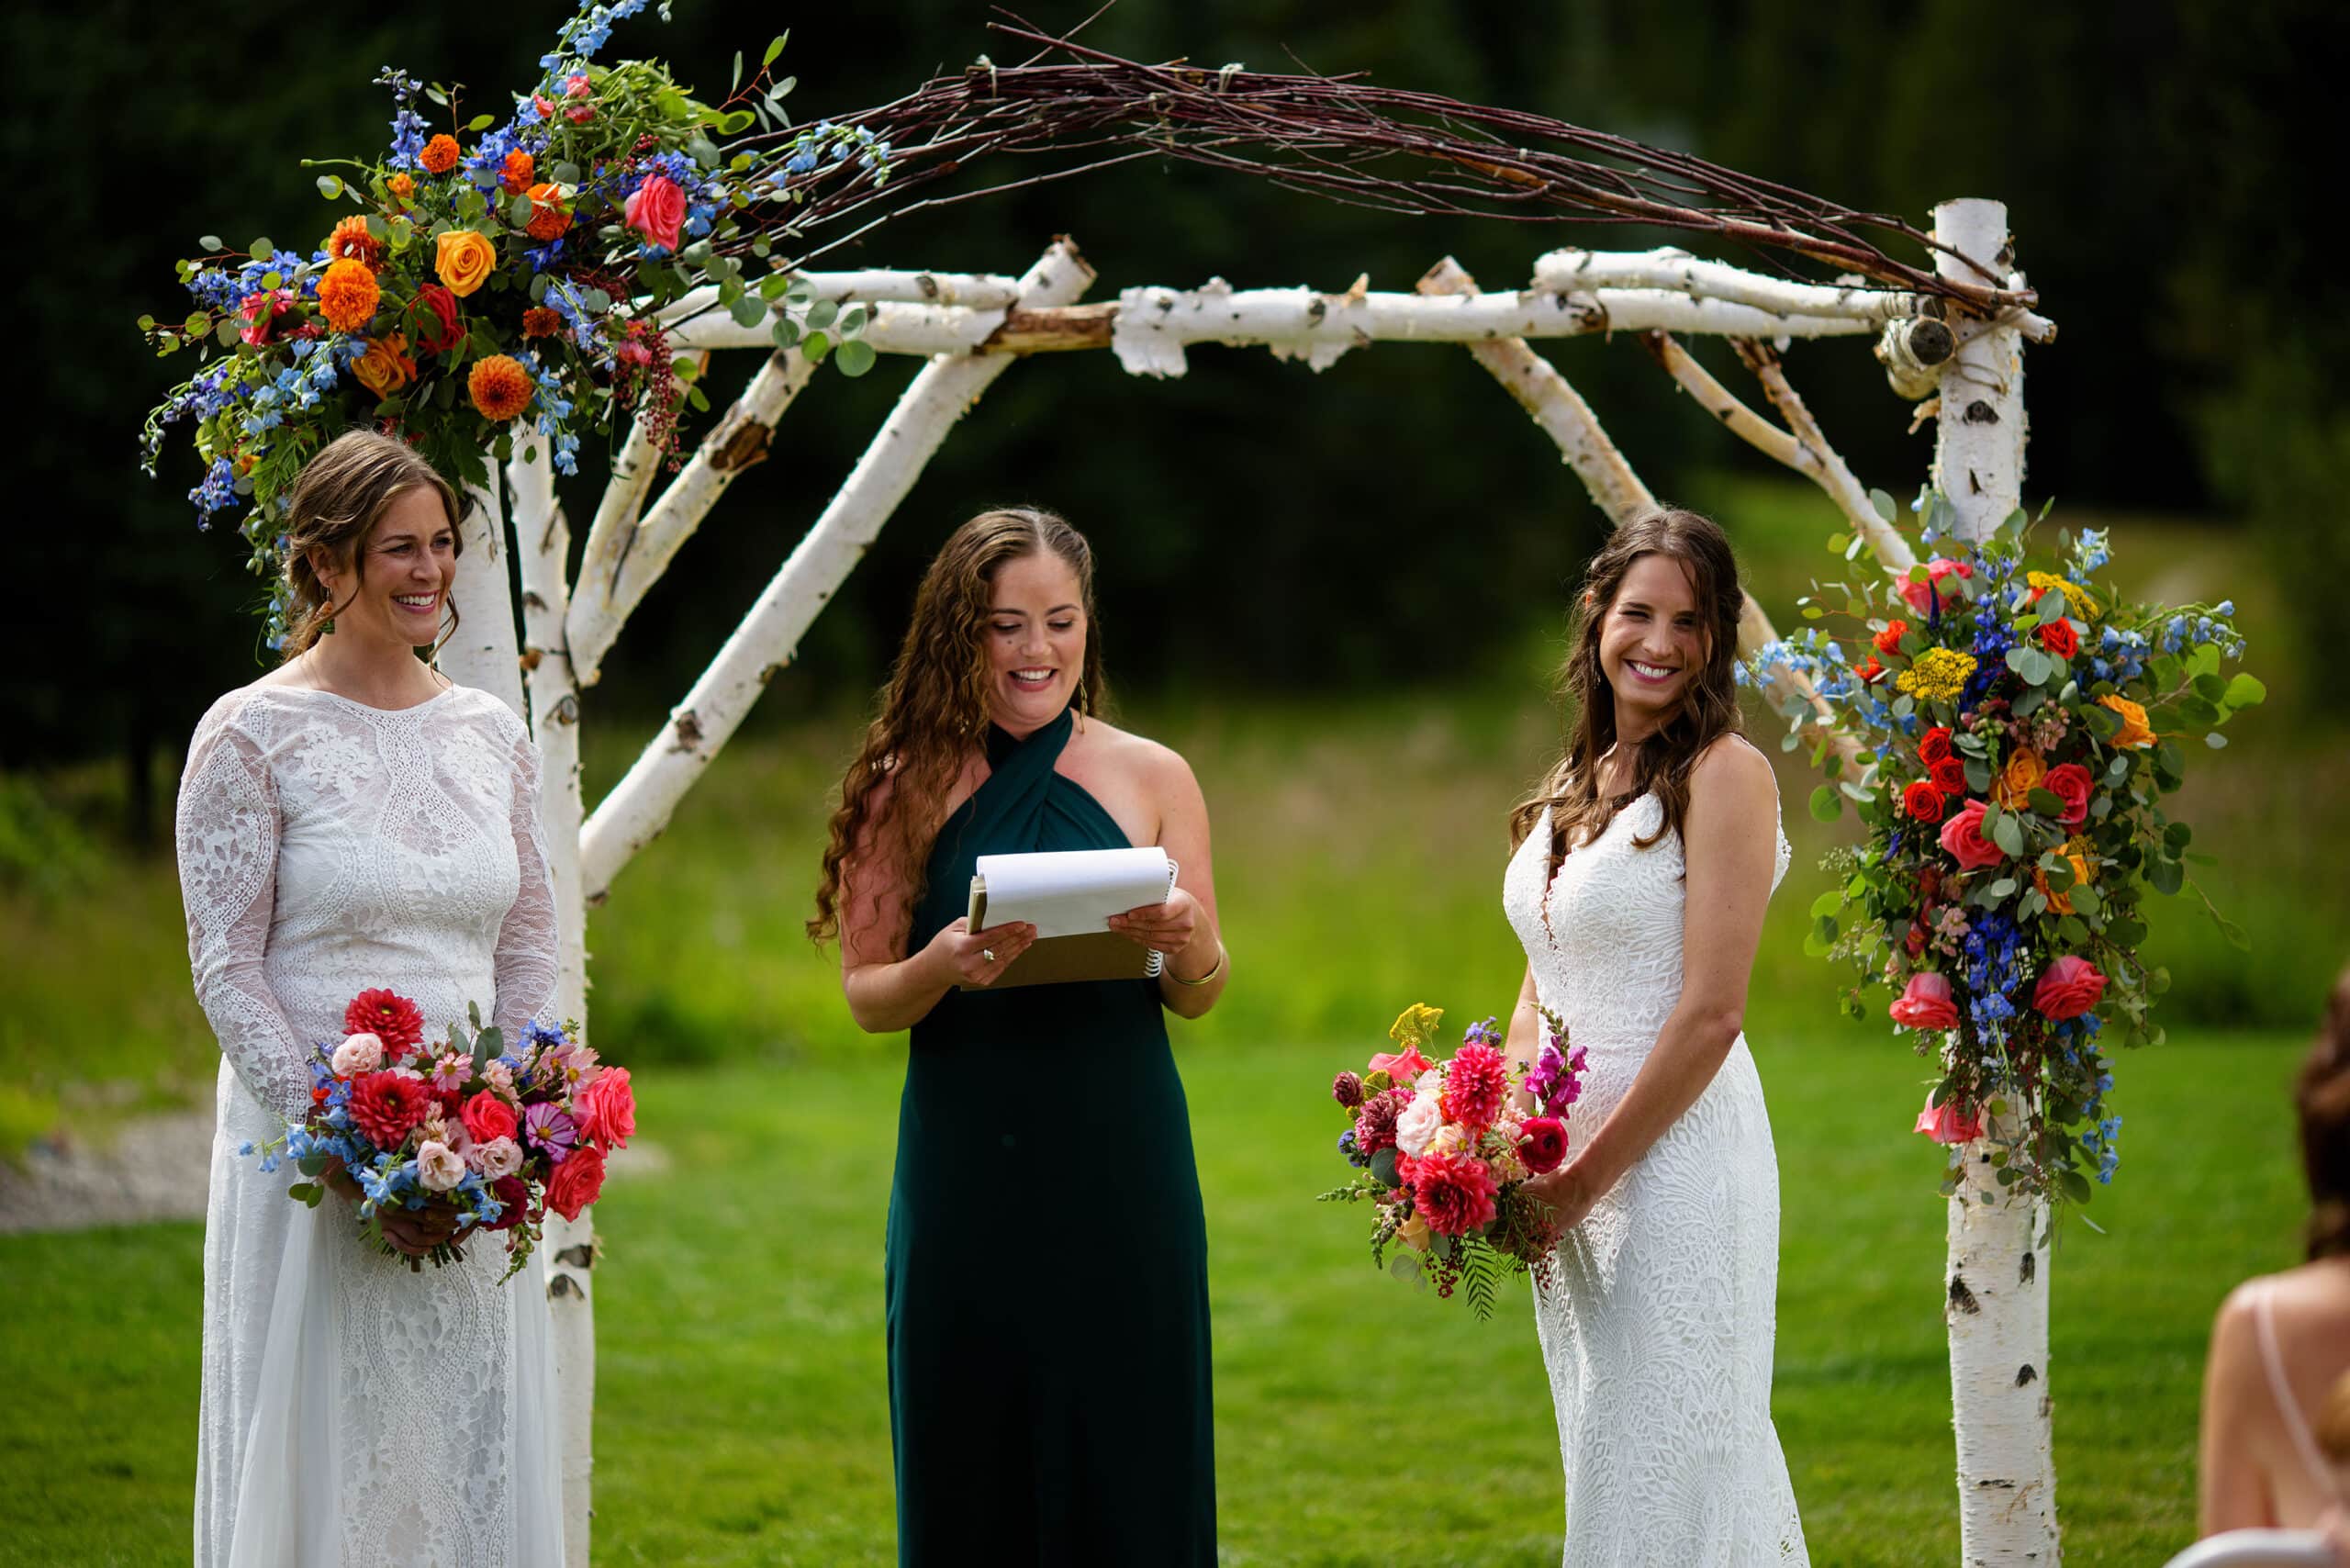 The brides smile during their ceremony at Breckenridge Nordic Center